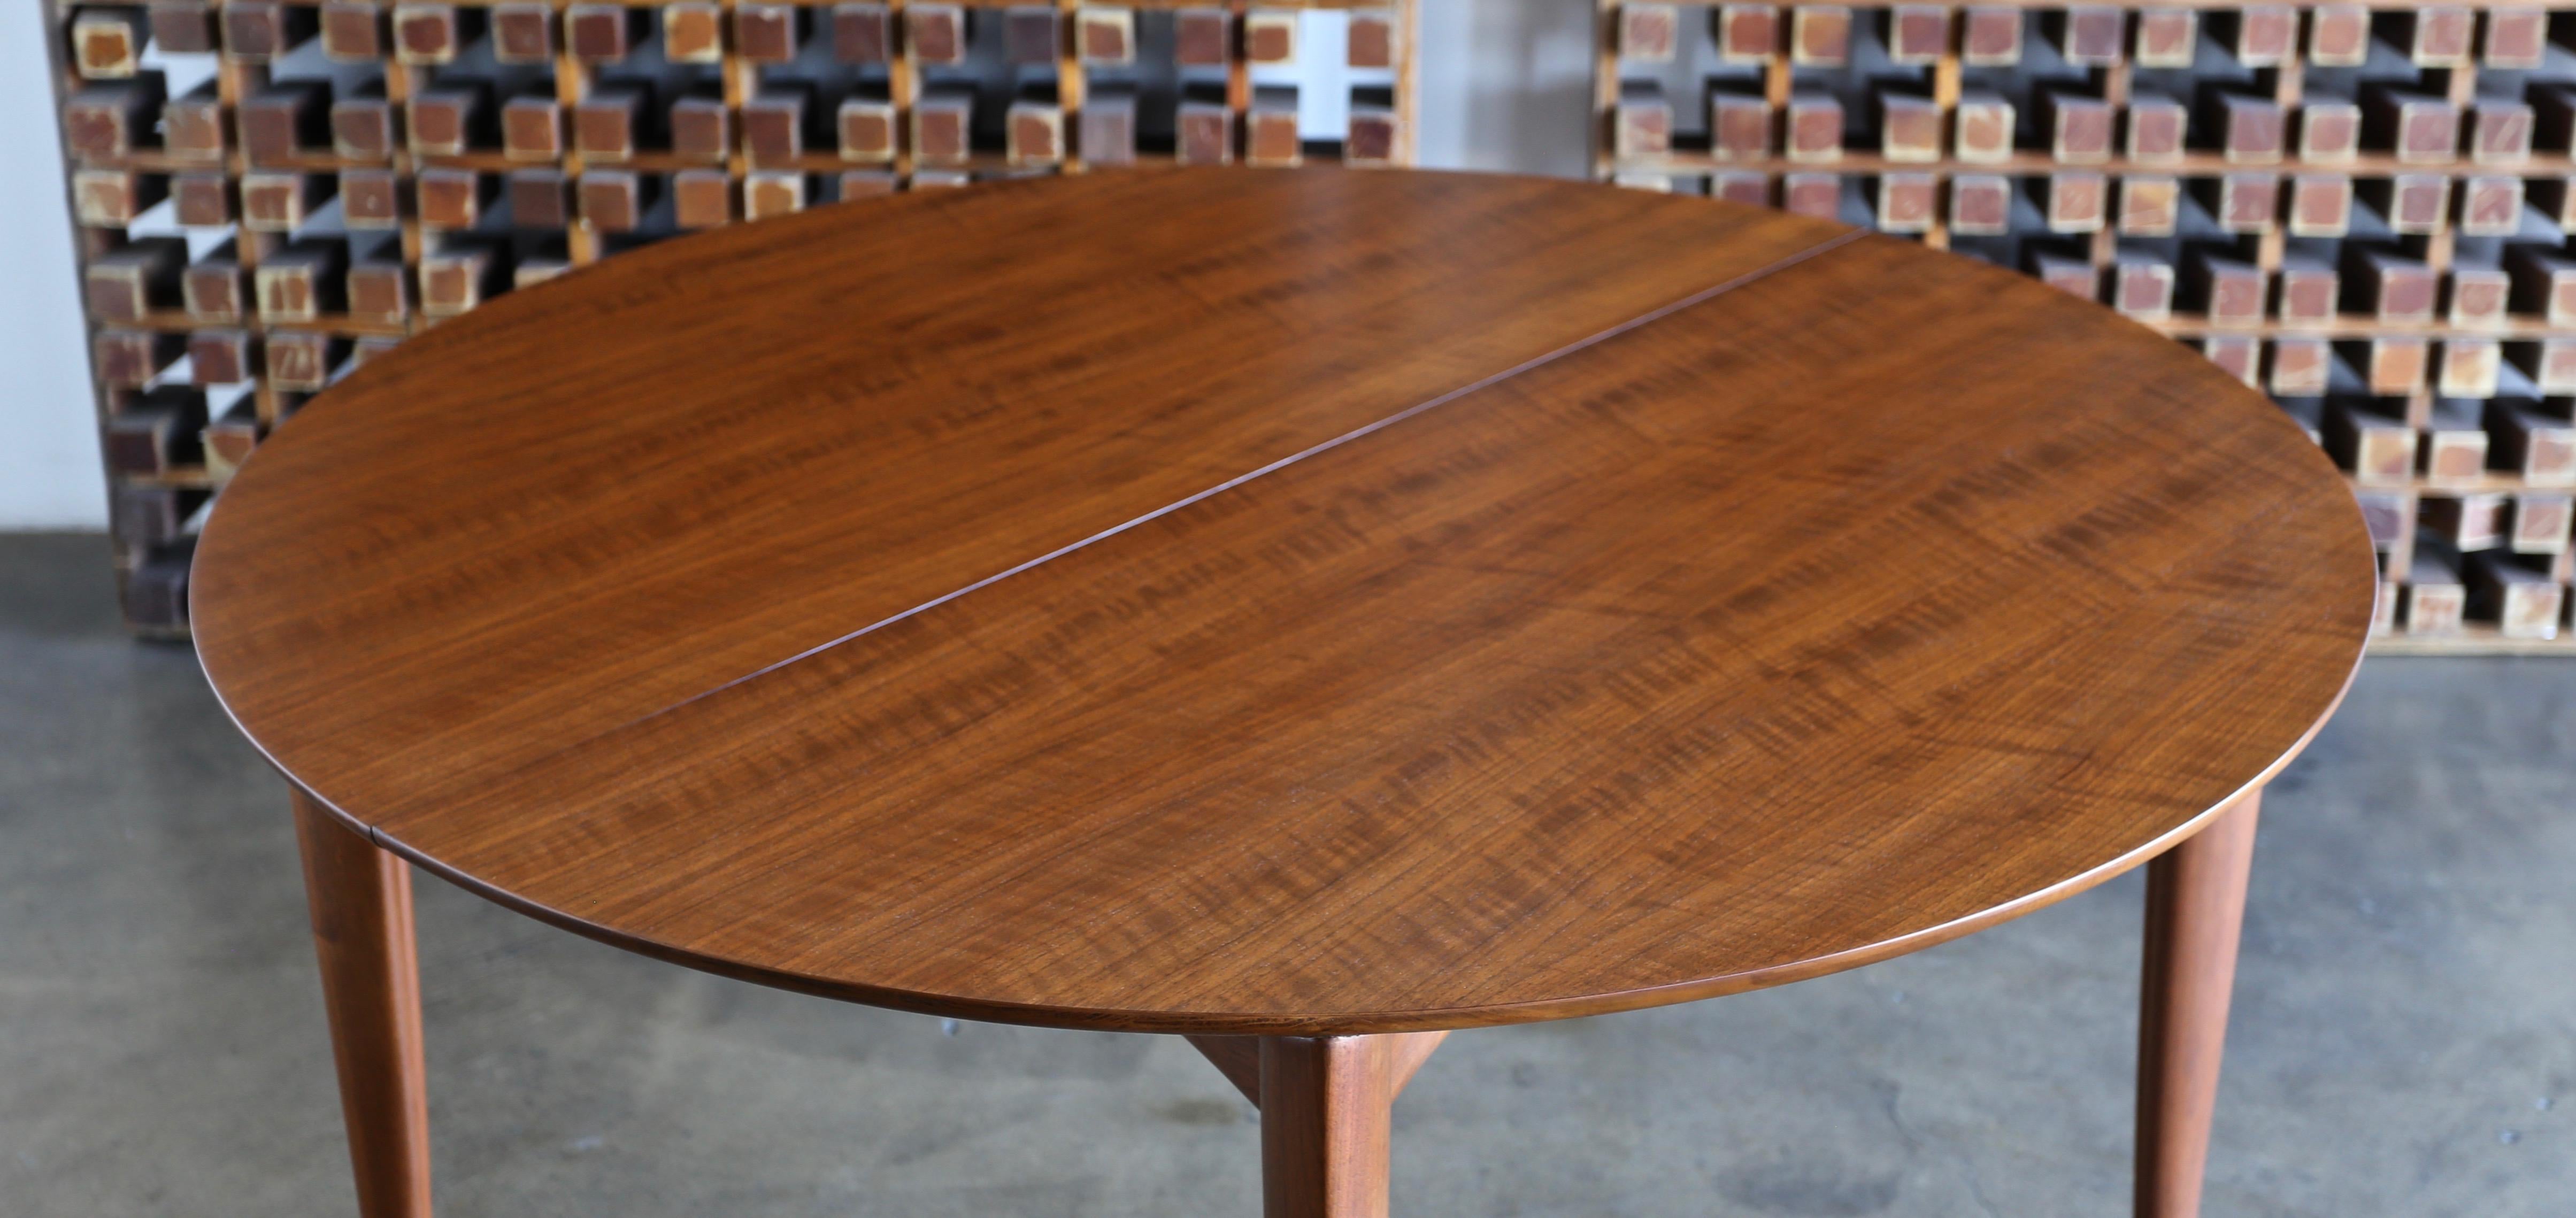 Italian Gio Ponti Dining Table for M. Singer & Sons, circa 1955